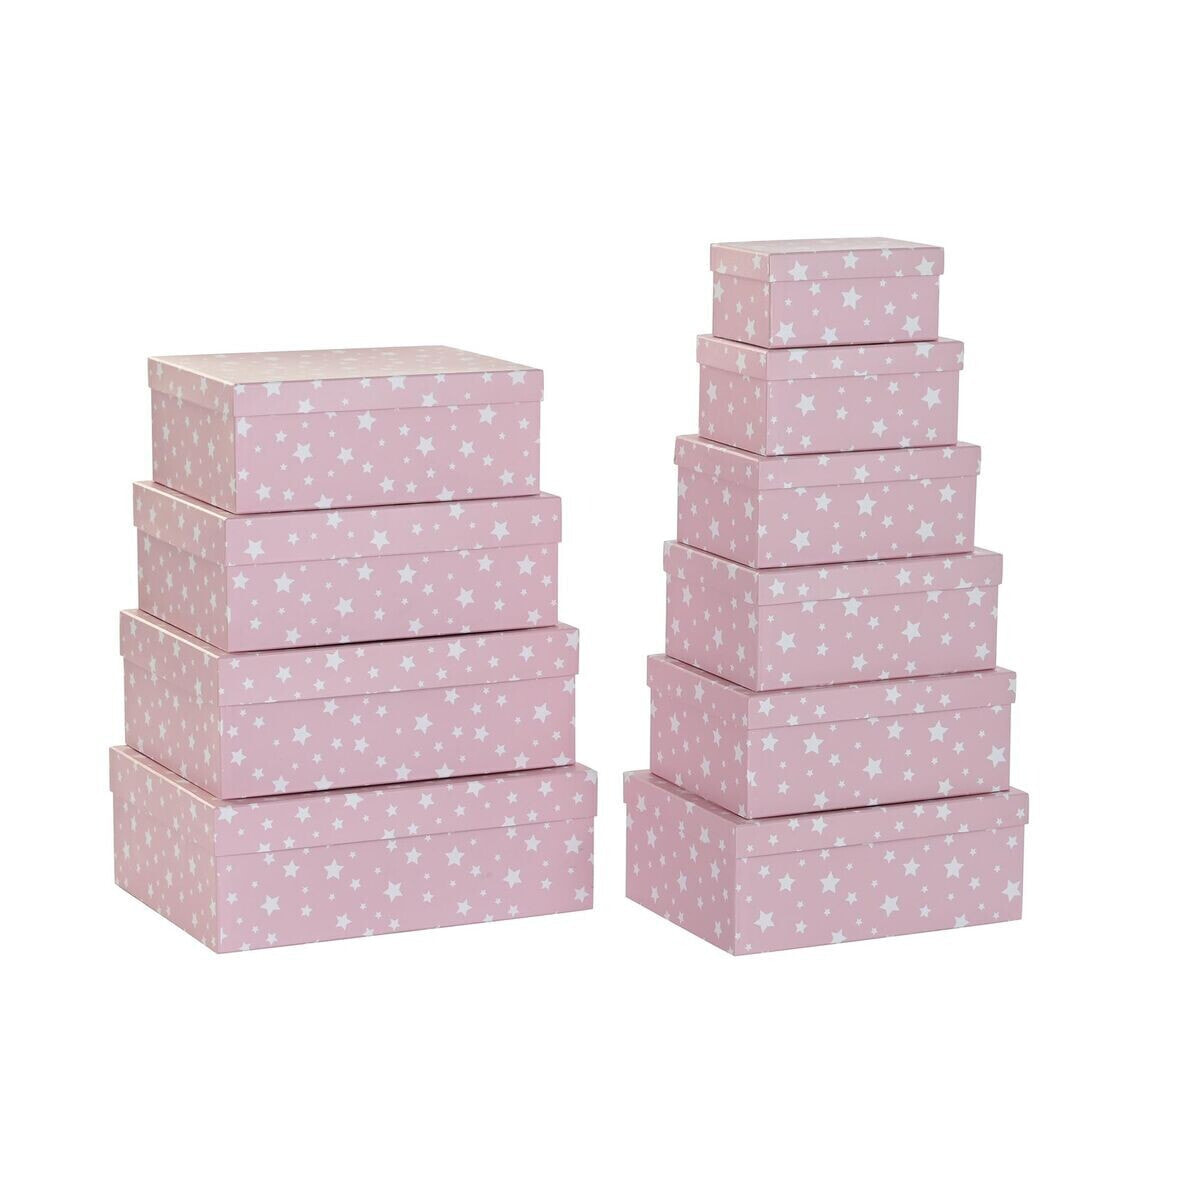 Set of Stackable Organising Boxes DKD Home Decor White Children's Light Pink Cardboard (43,5 x 33,5 x 15,5 cm)